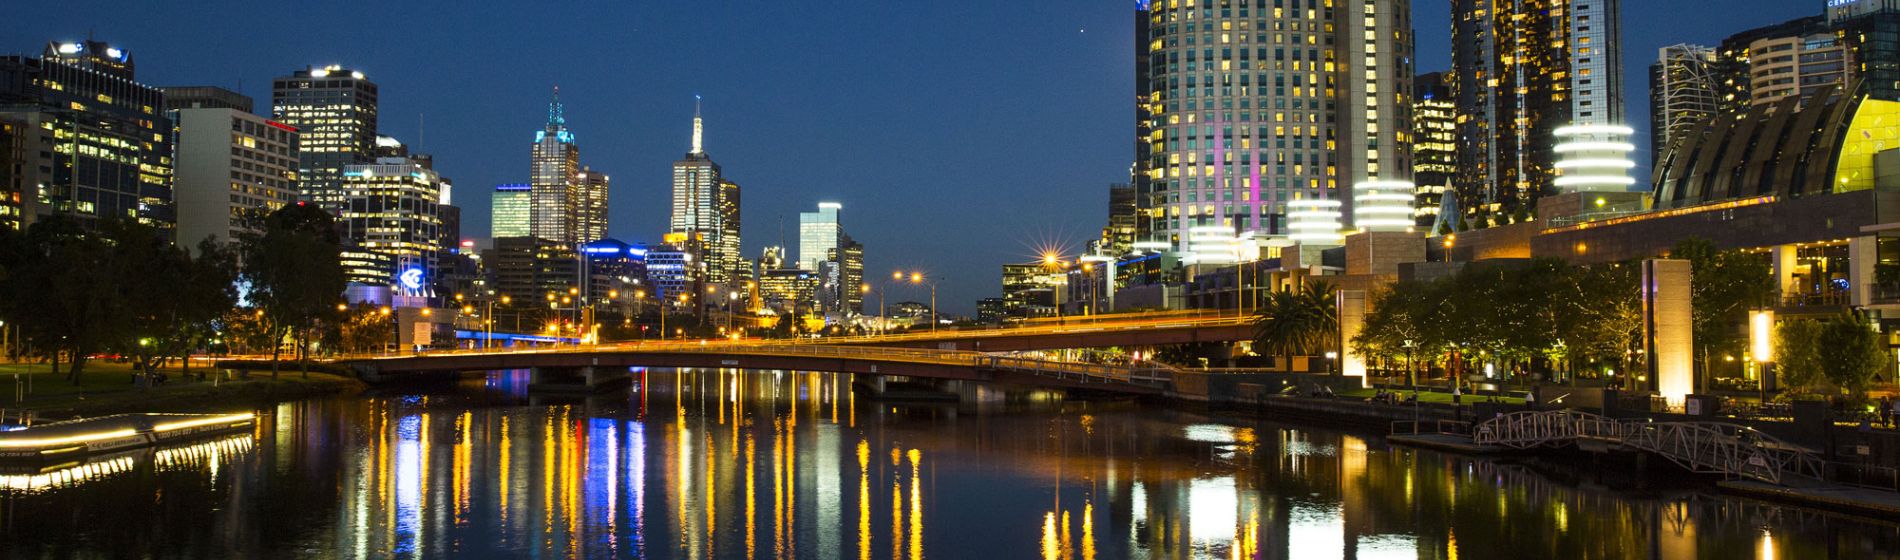 vic_melbourne_by_night.jpg